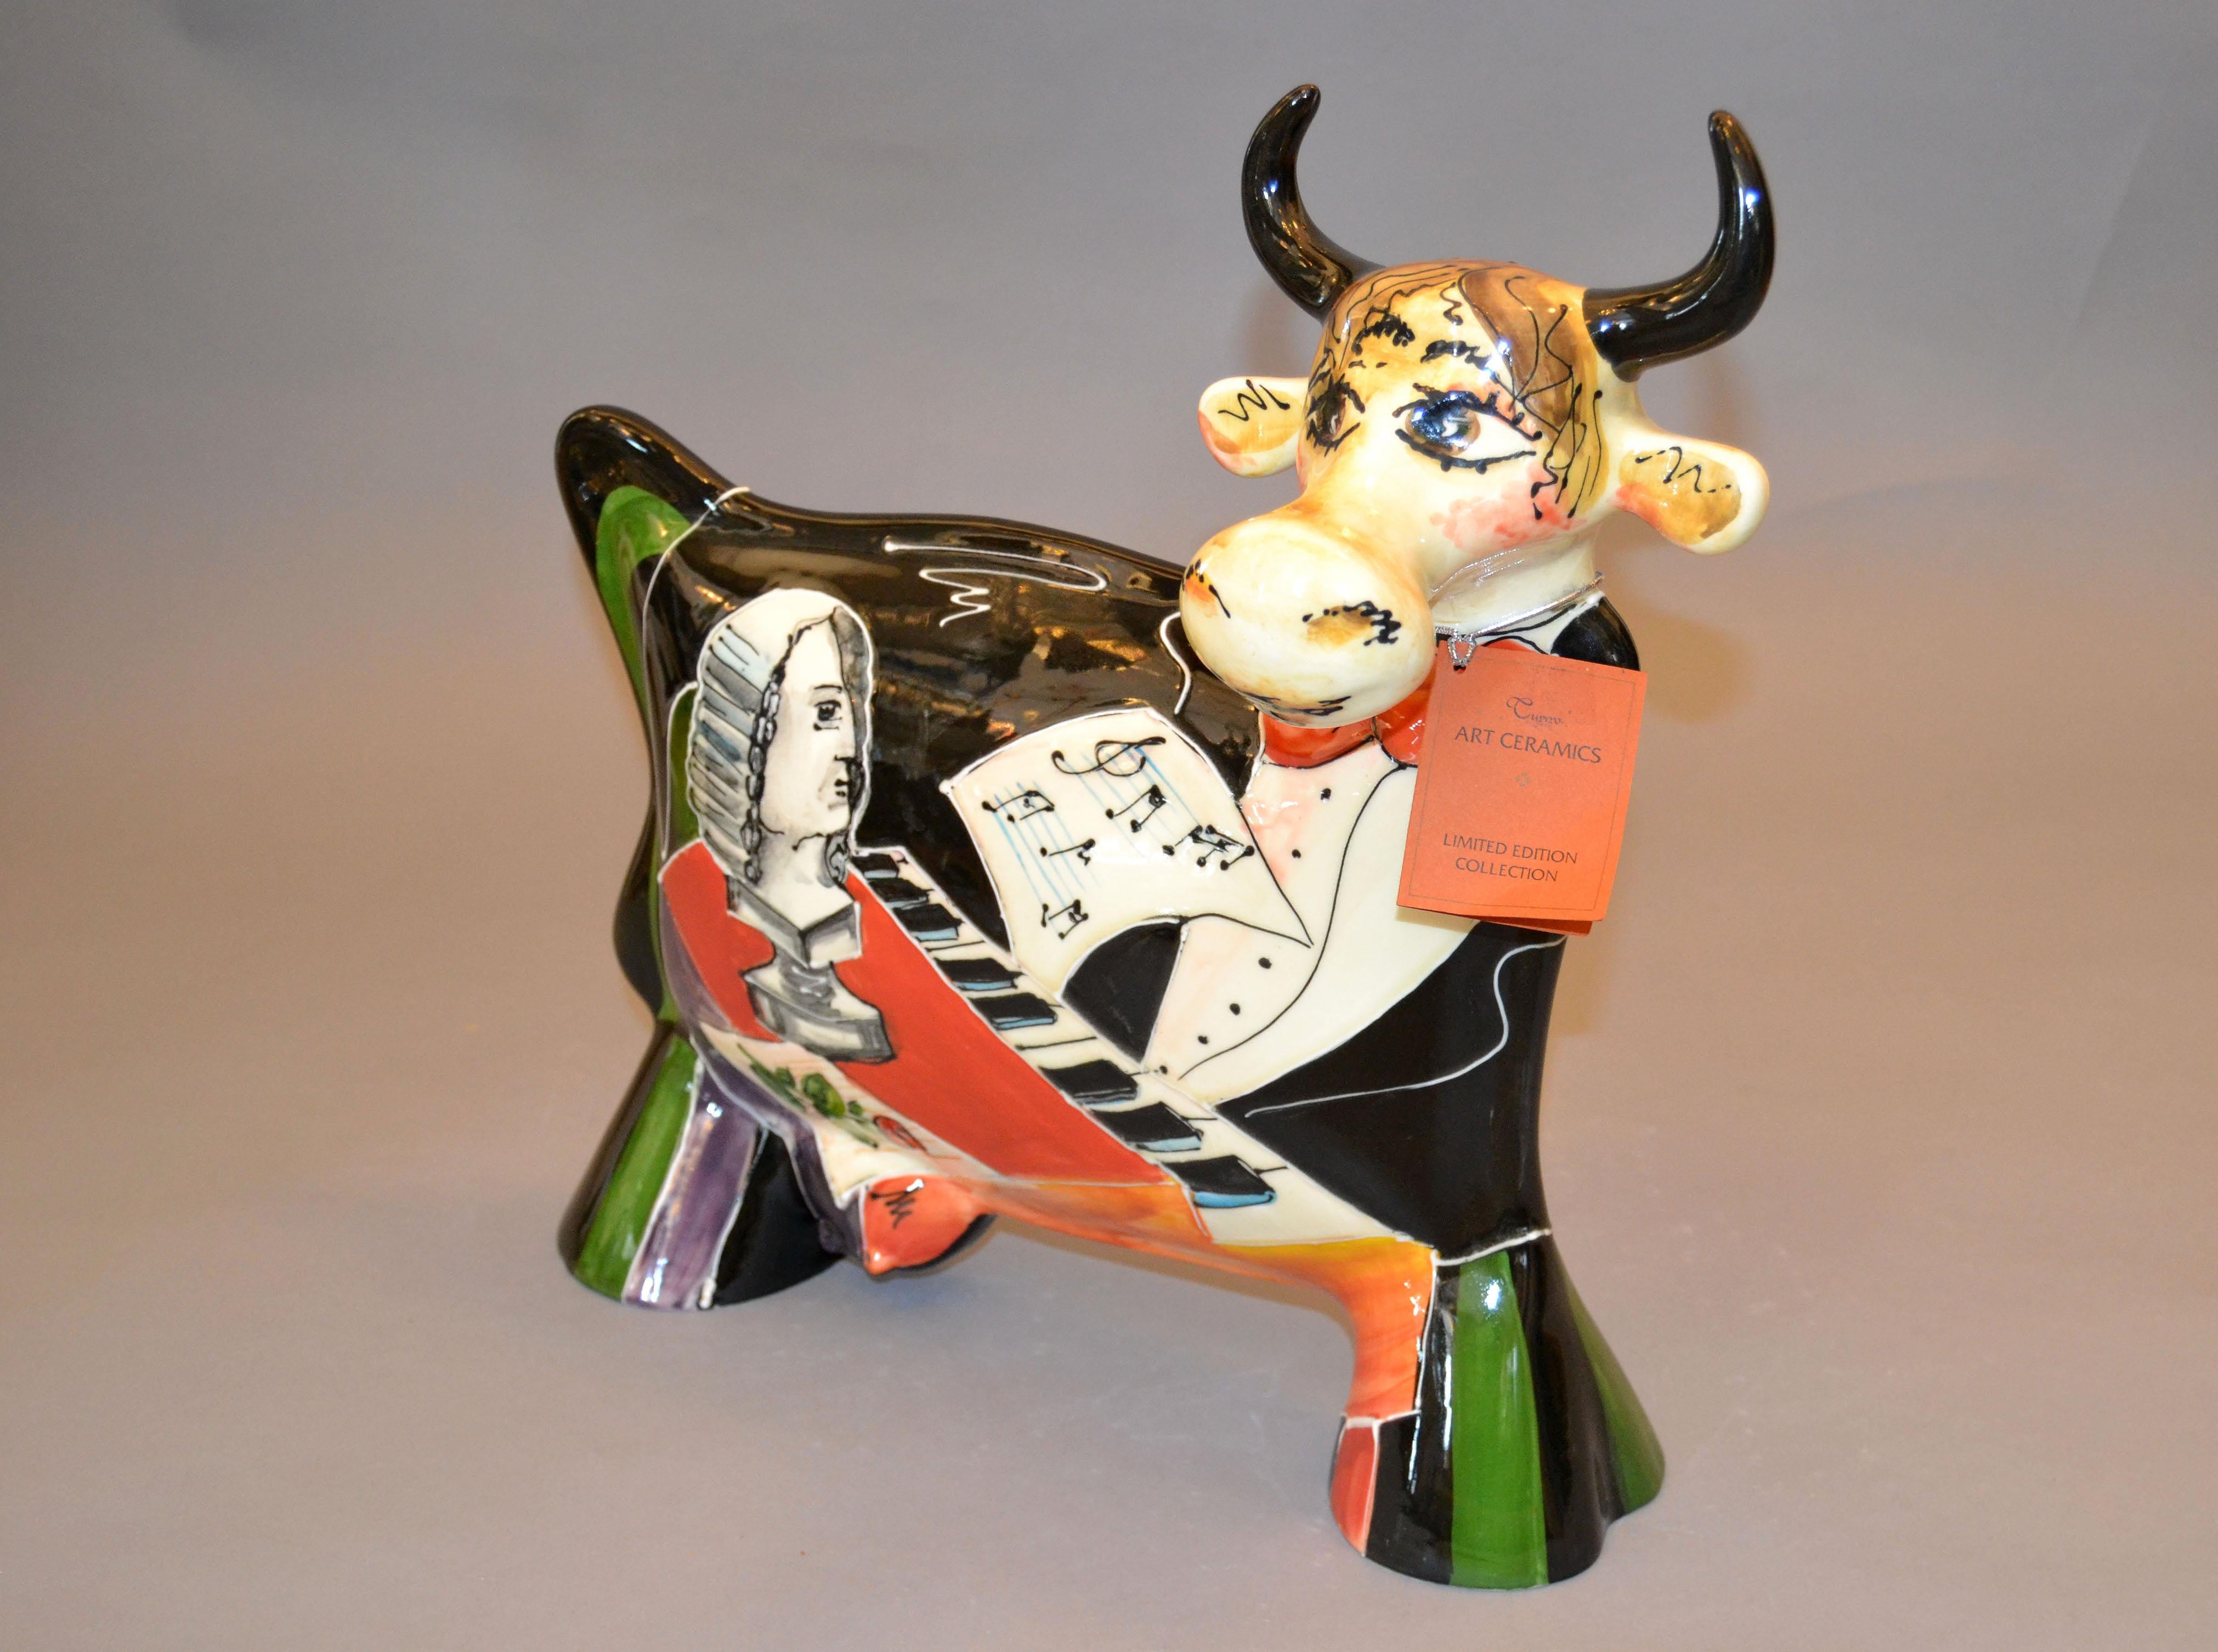 Modern hand painted art ceramic cow by Turov.
The cow shows a scene of 'classical music' with Piano and Bust.
Studio Turov Art presents the unique artistic ceramics which pays strict attention to details.
Each ceramic piece from this collection